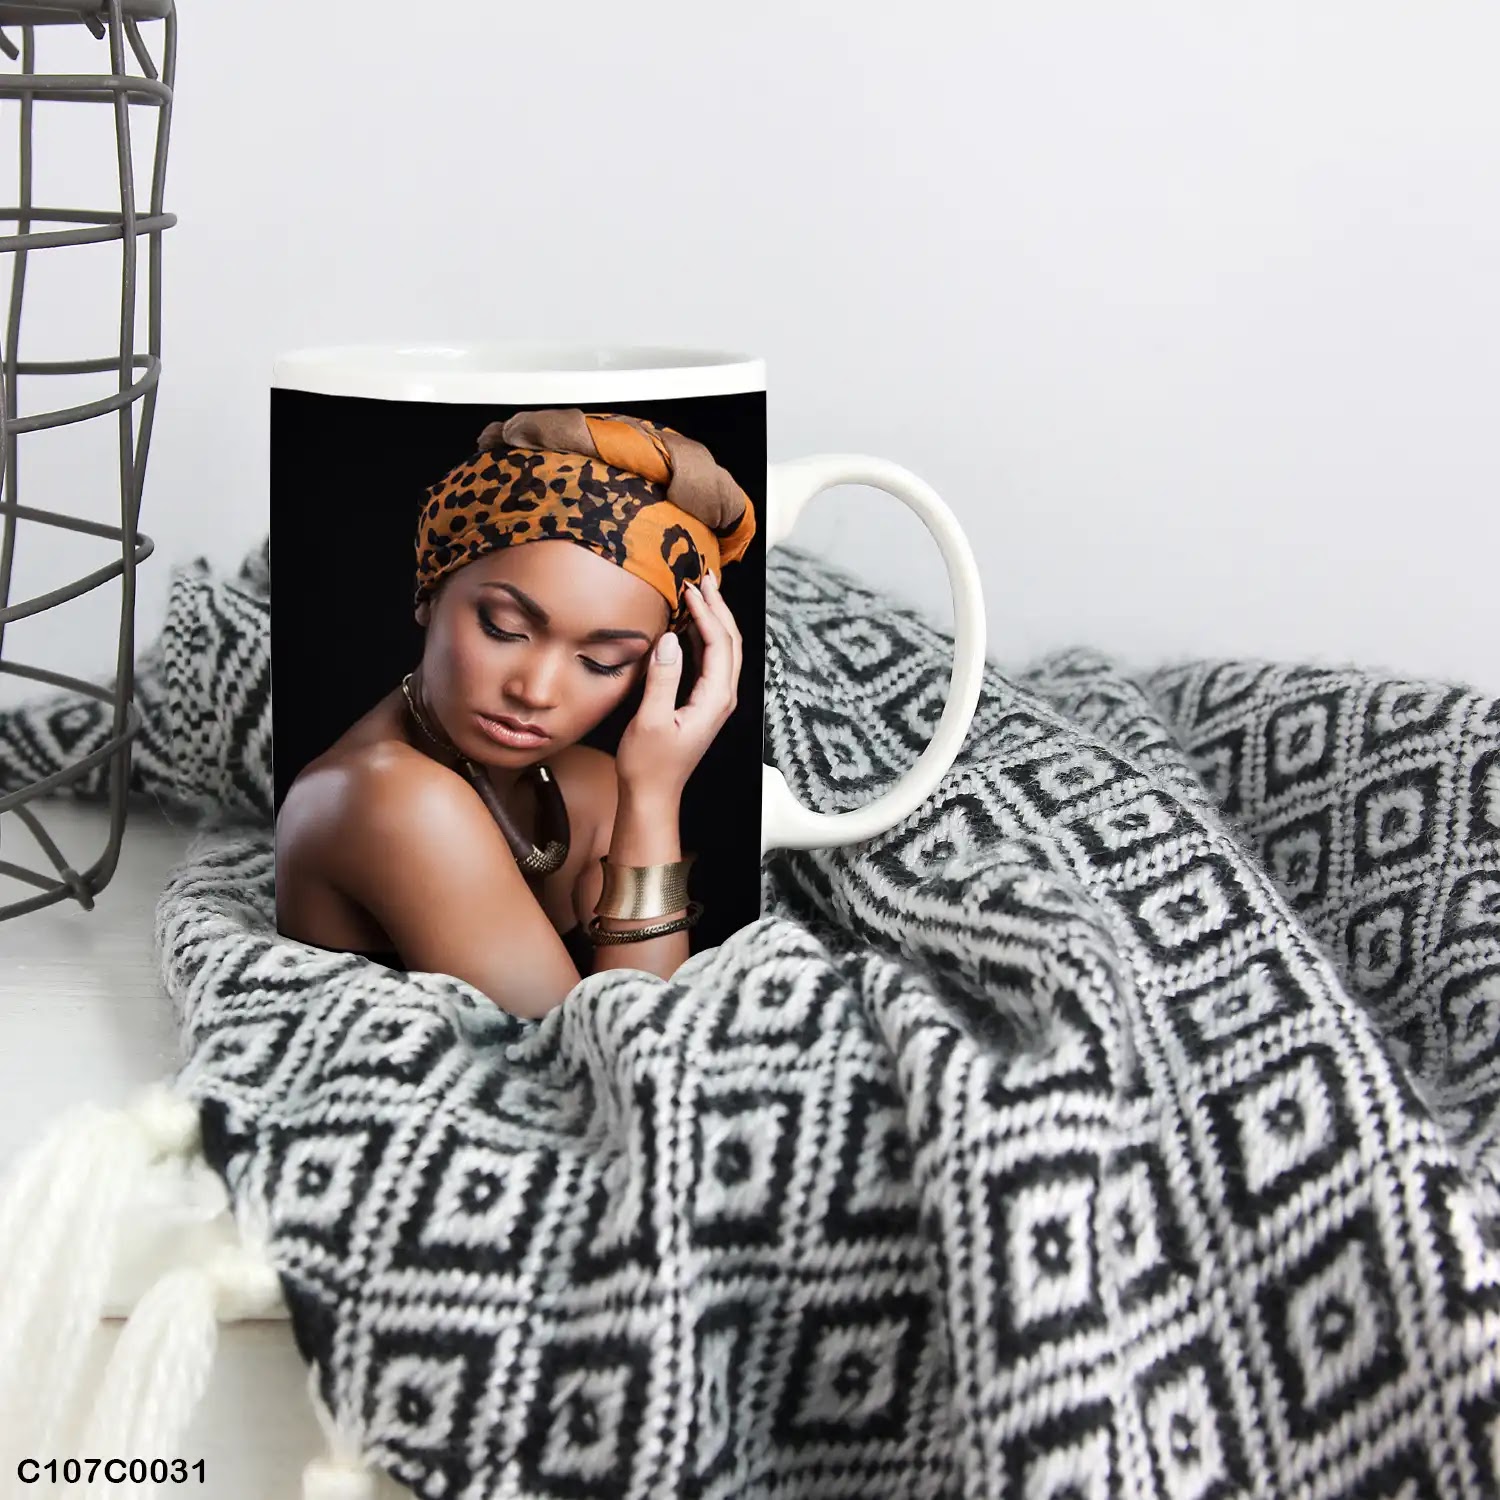 A mug (cup) printed with an image of an African woman